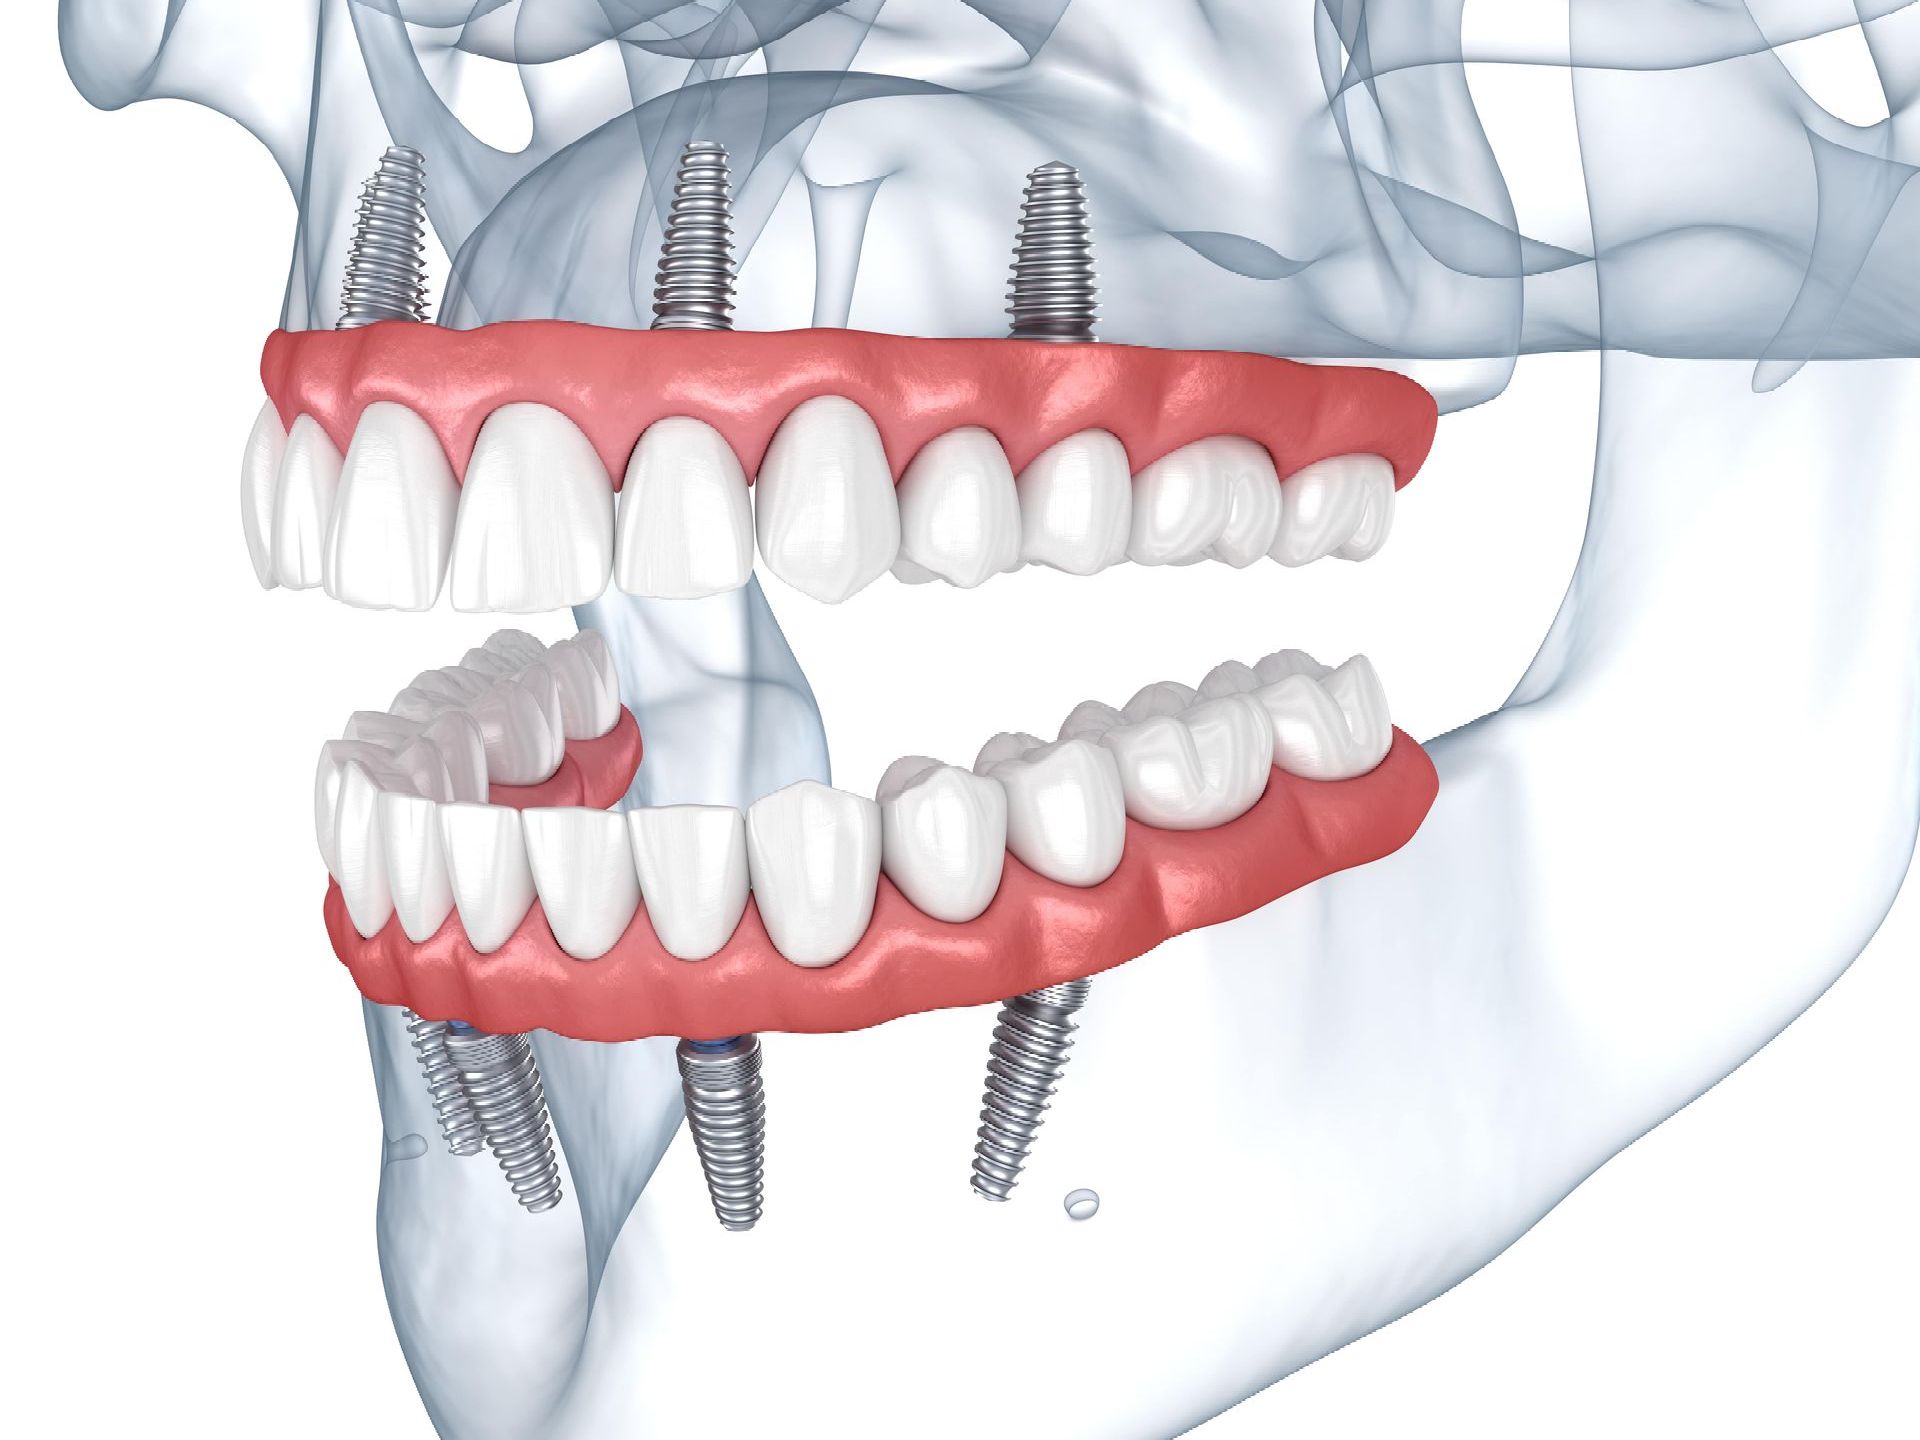 A computer generated image of a dental cleaning procedure